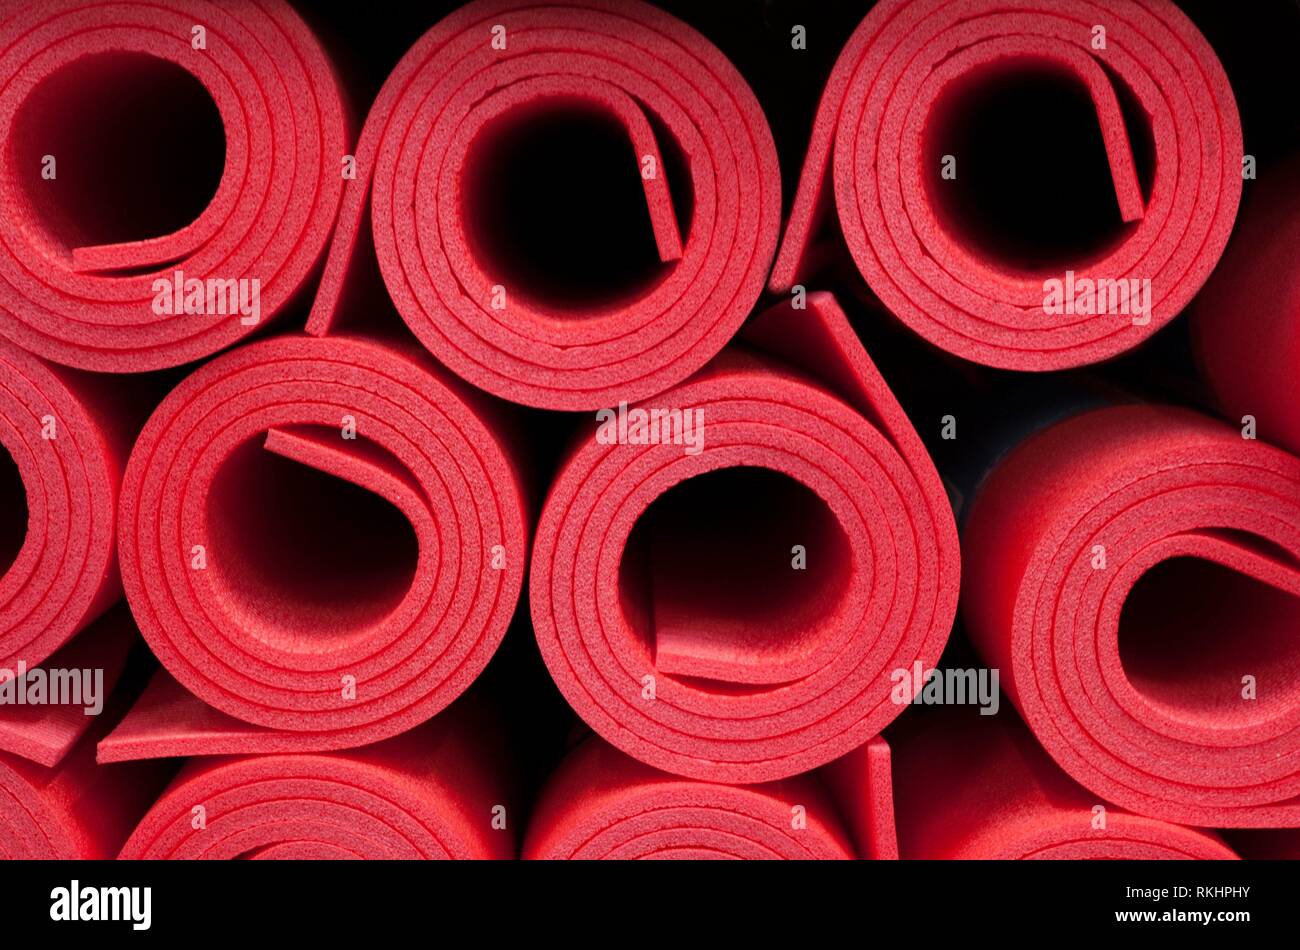 Lot of rolled up red foam fitness mats background. Travel and sport. Stock Photo